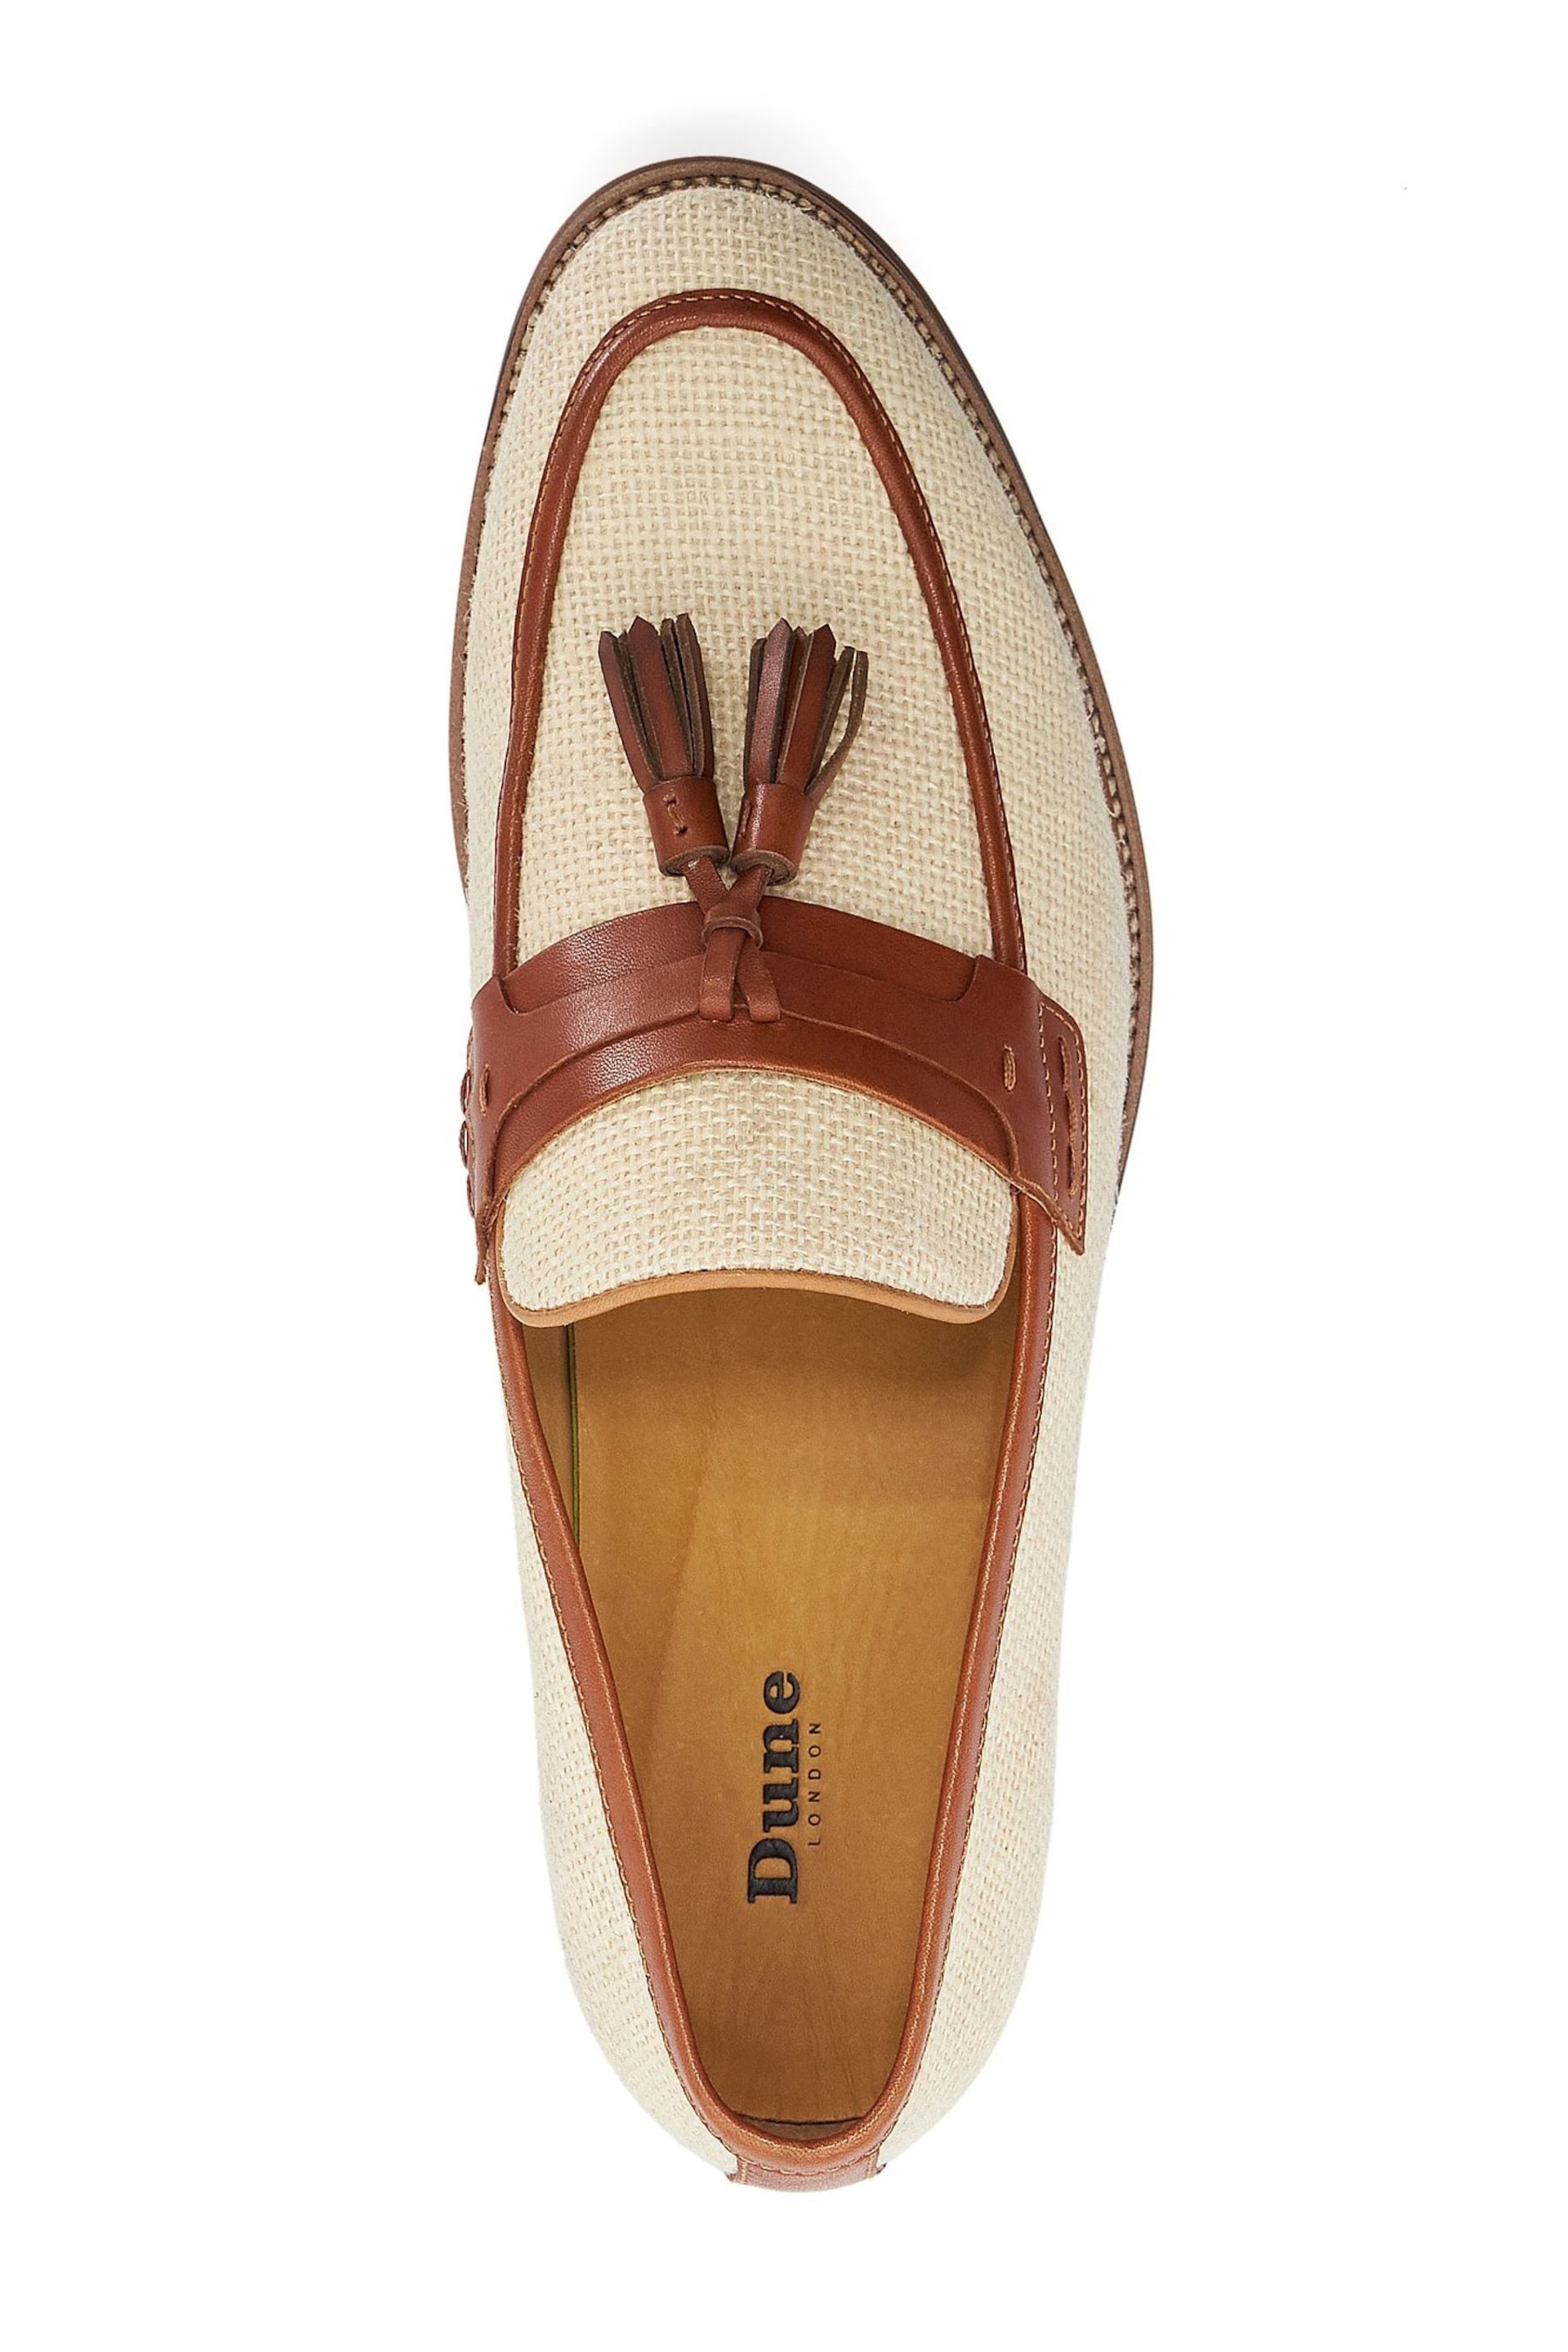 Dune London Brown Sought Mixed Material Loafers - Image 4 of 6